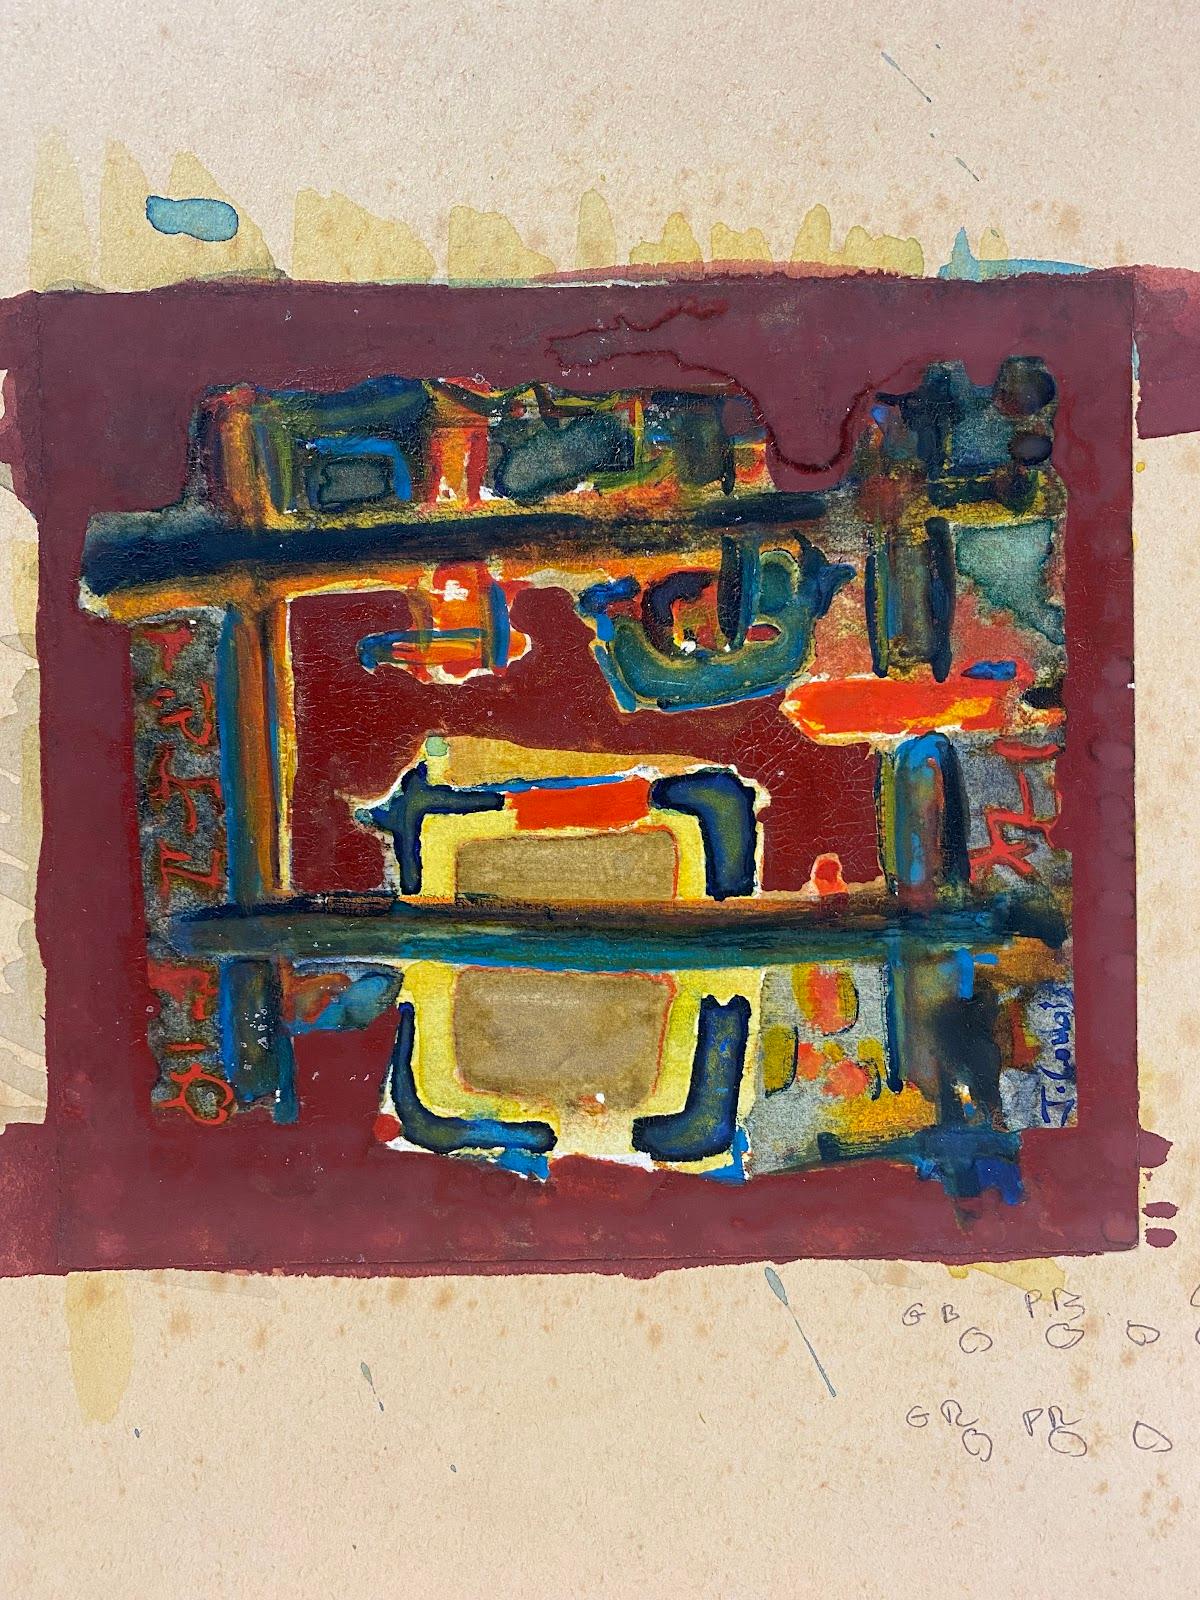 Abstract Expressionist Composition
by Jacques COULAIS (1955-2011)
gouache painting on board
unframed: 11.75 x 15  inches
condition: excellent
provenance: all the paintings we have for sale by this artist have come from the artists studio and are all